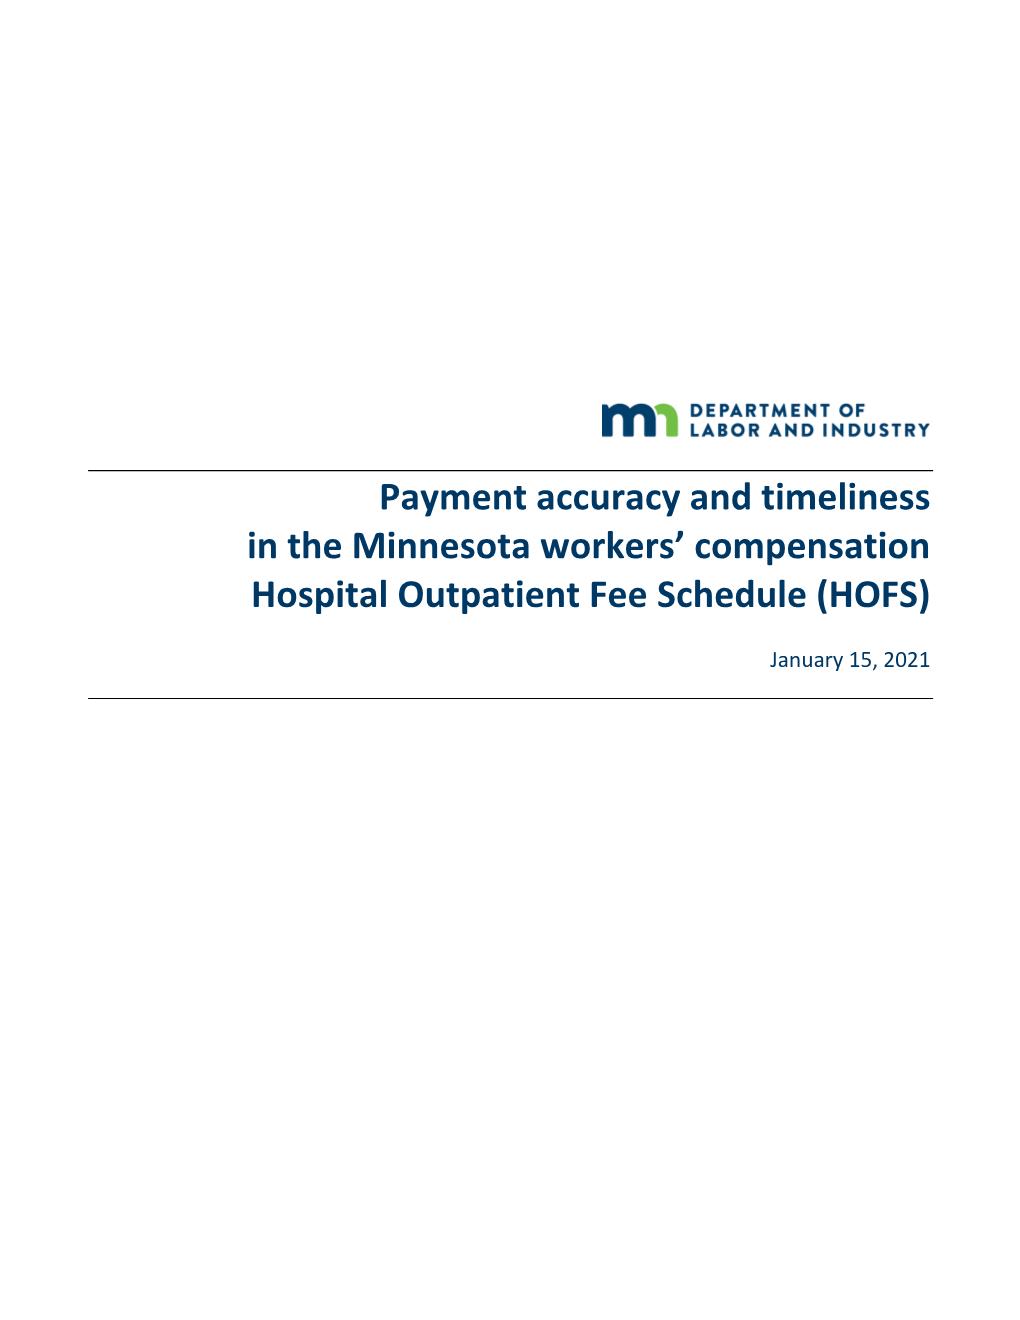 Hospital Outpatient Fee Schedule (HOFS)